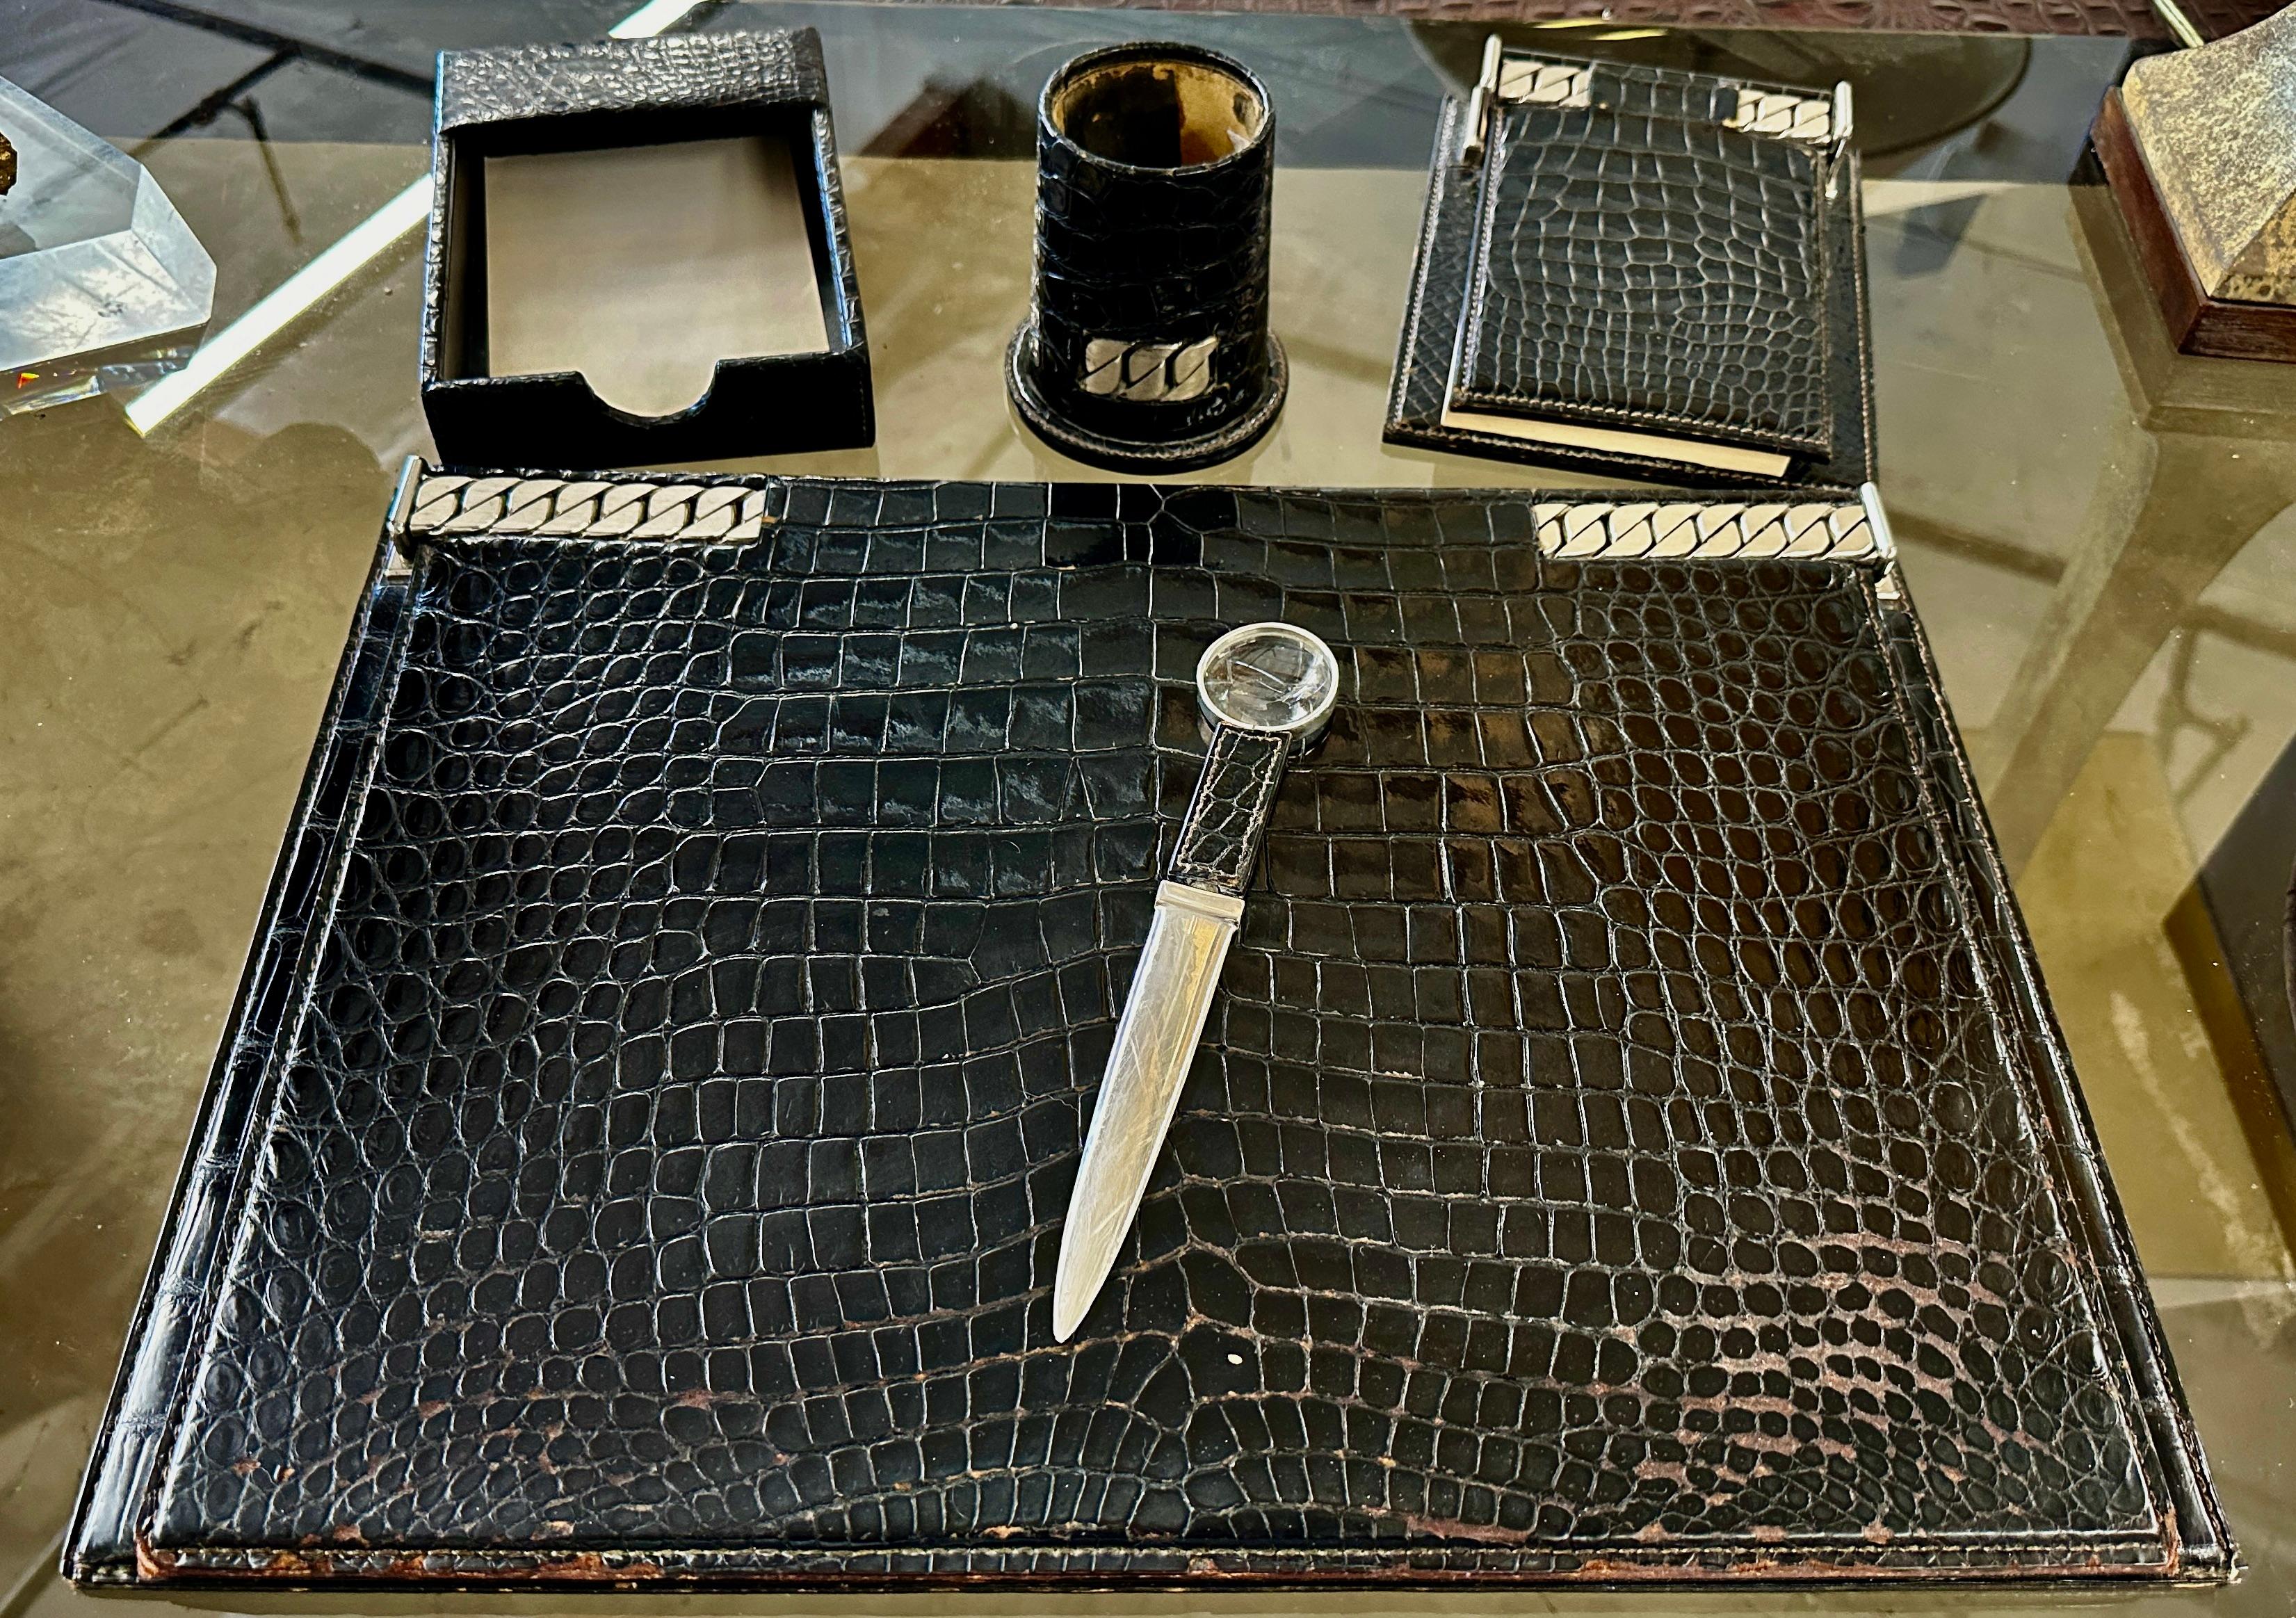 A fabulous and rare Gucci 5 piece desk set in either Alligator or Crocodile real leather or embossed leather. Likely from the 1970's although I've seen pieces attributed to the 1960's and special order. 
It's rare to find a set this complete. The